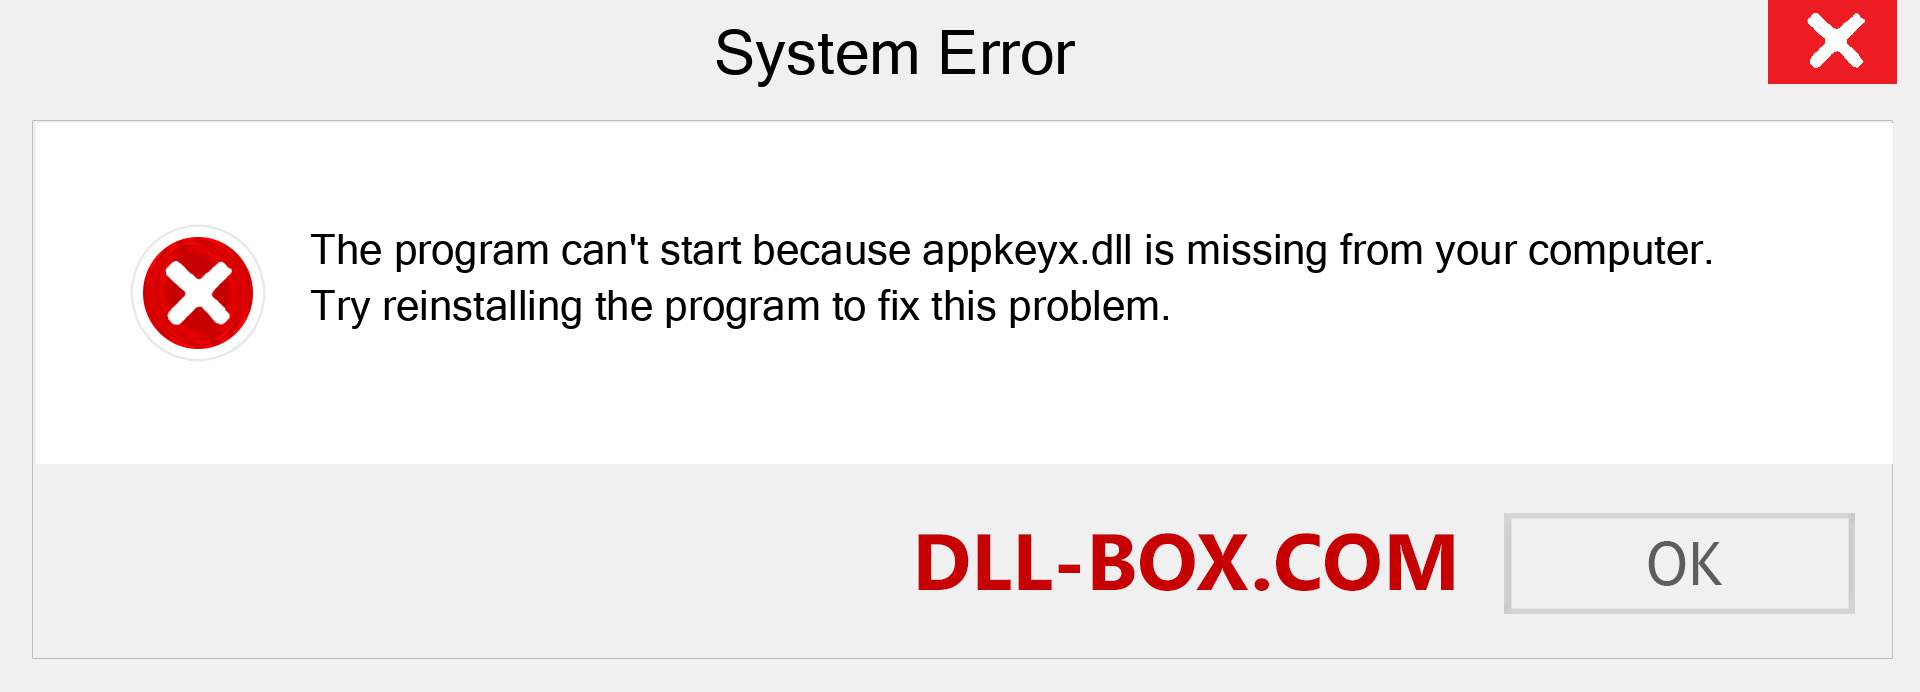  appkeyx.dll file is missing?. Download for Windows 7, 8, 10 - Fix  appkeyx dll Missing Error on Windows, photos, images